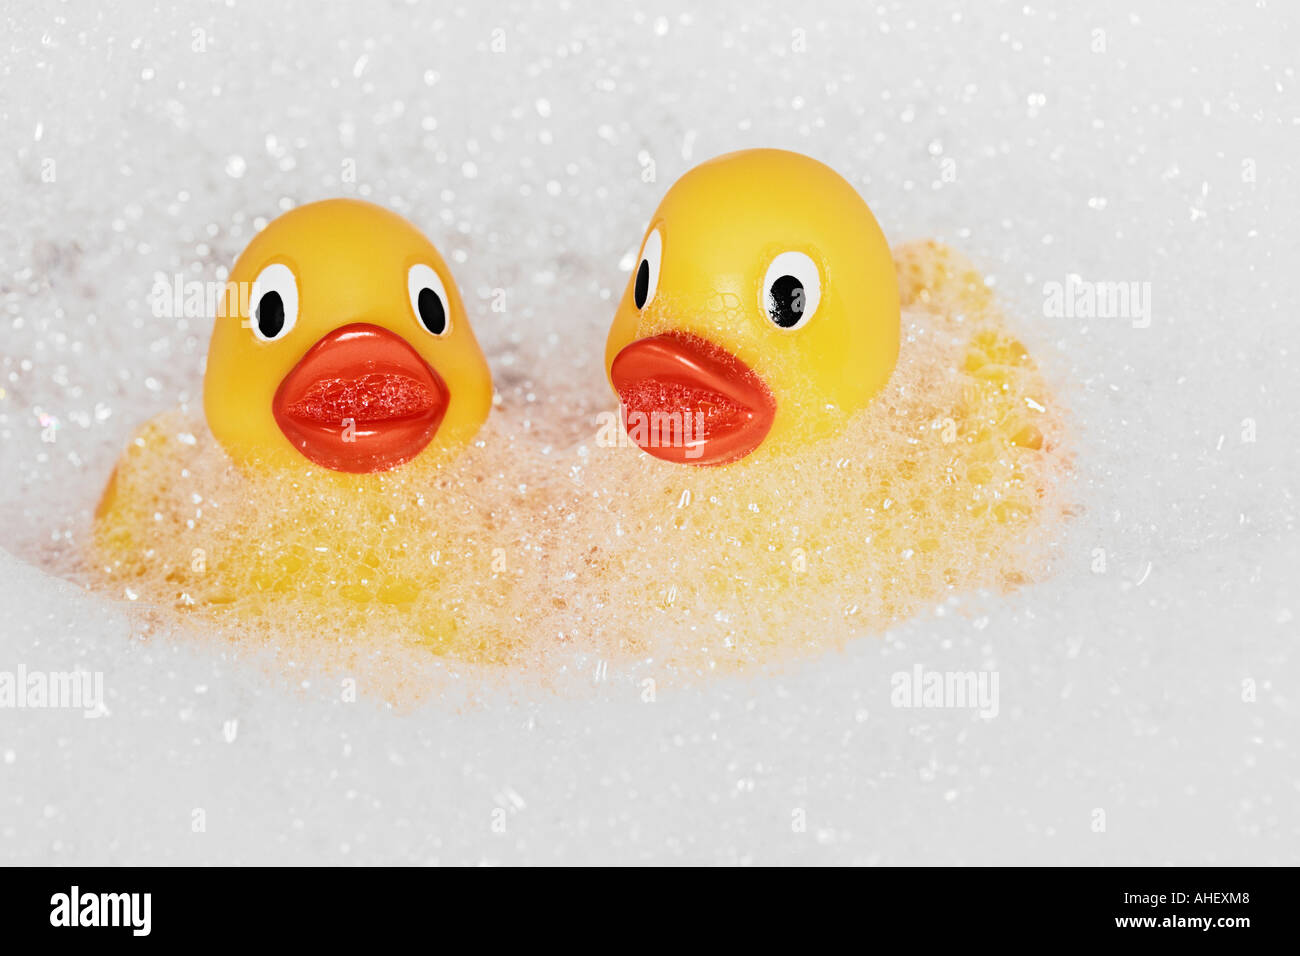 Seamless pattern with bath accessories - shampoo, rubber duck